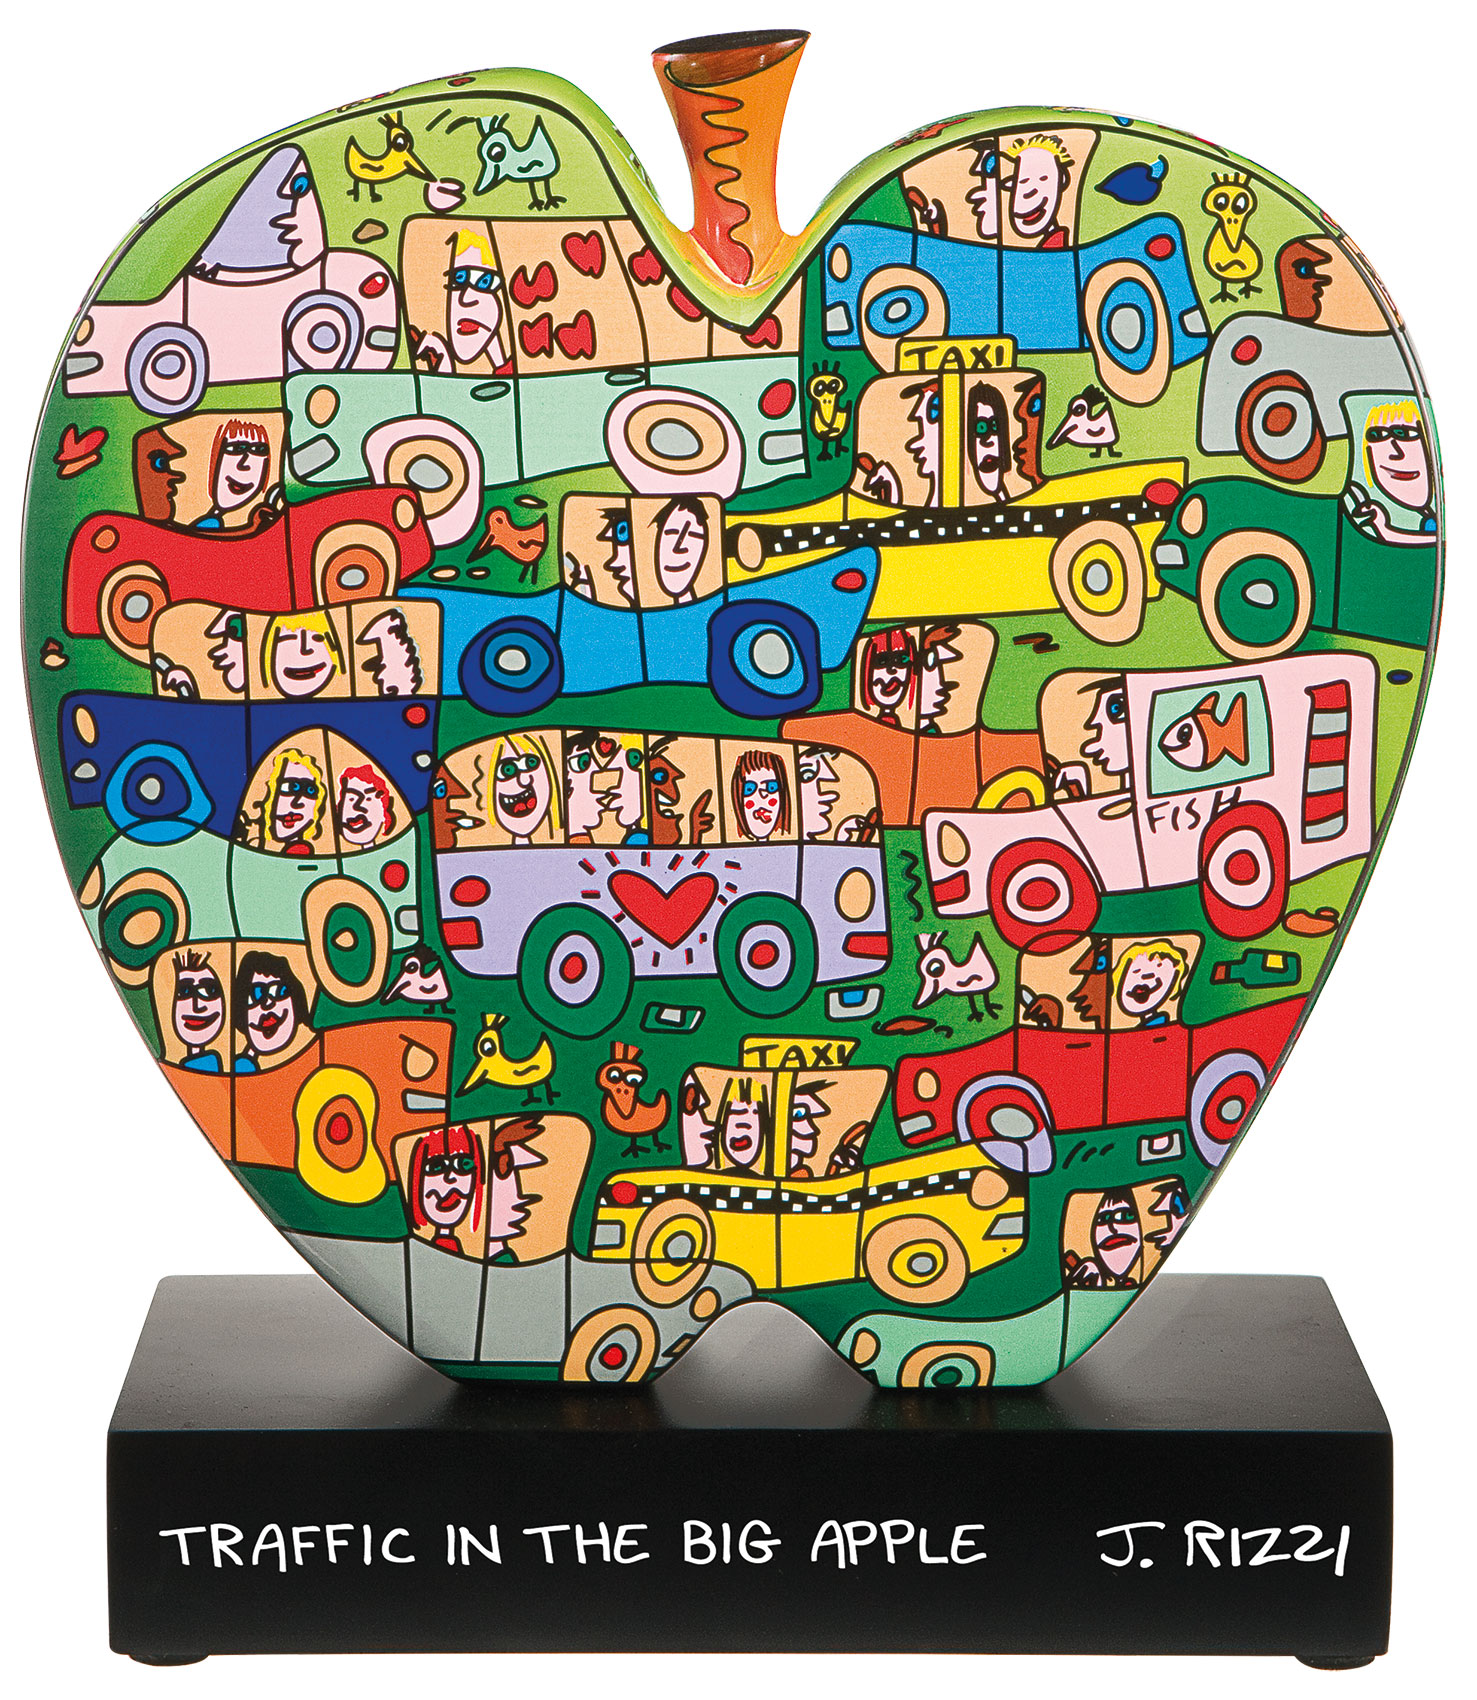 Porcelain object "Traffic in the big apple" by James Rizzi